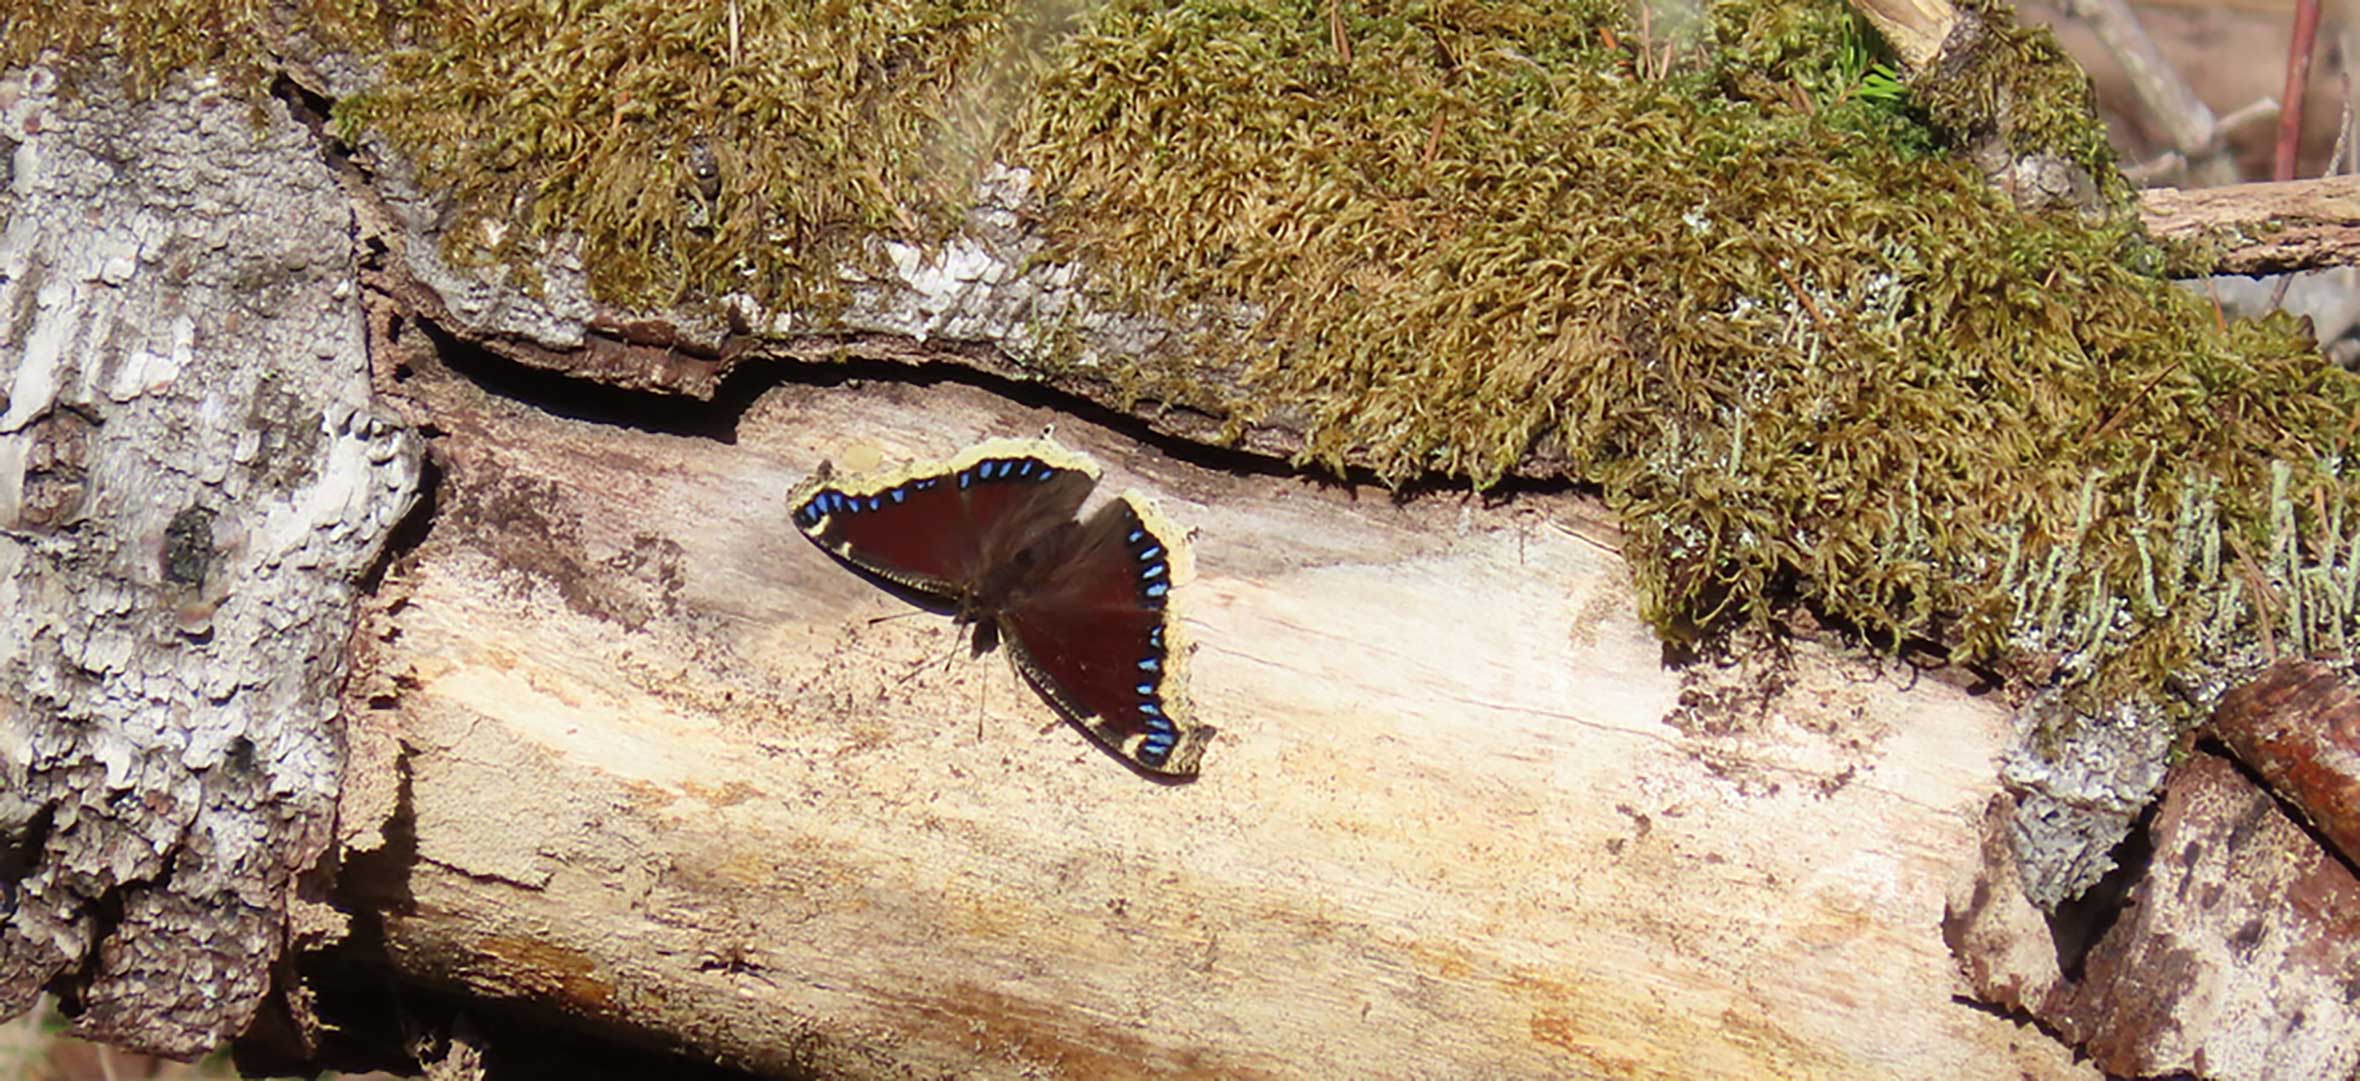 A photo of the mourning cloak